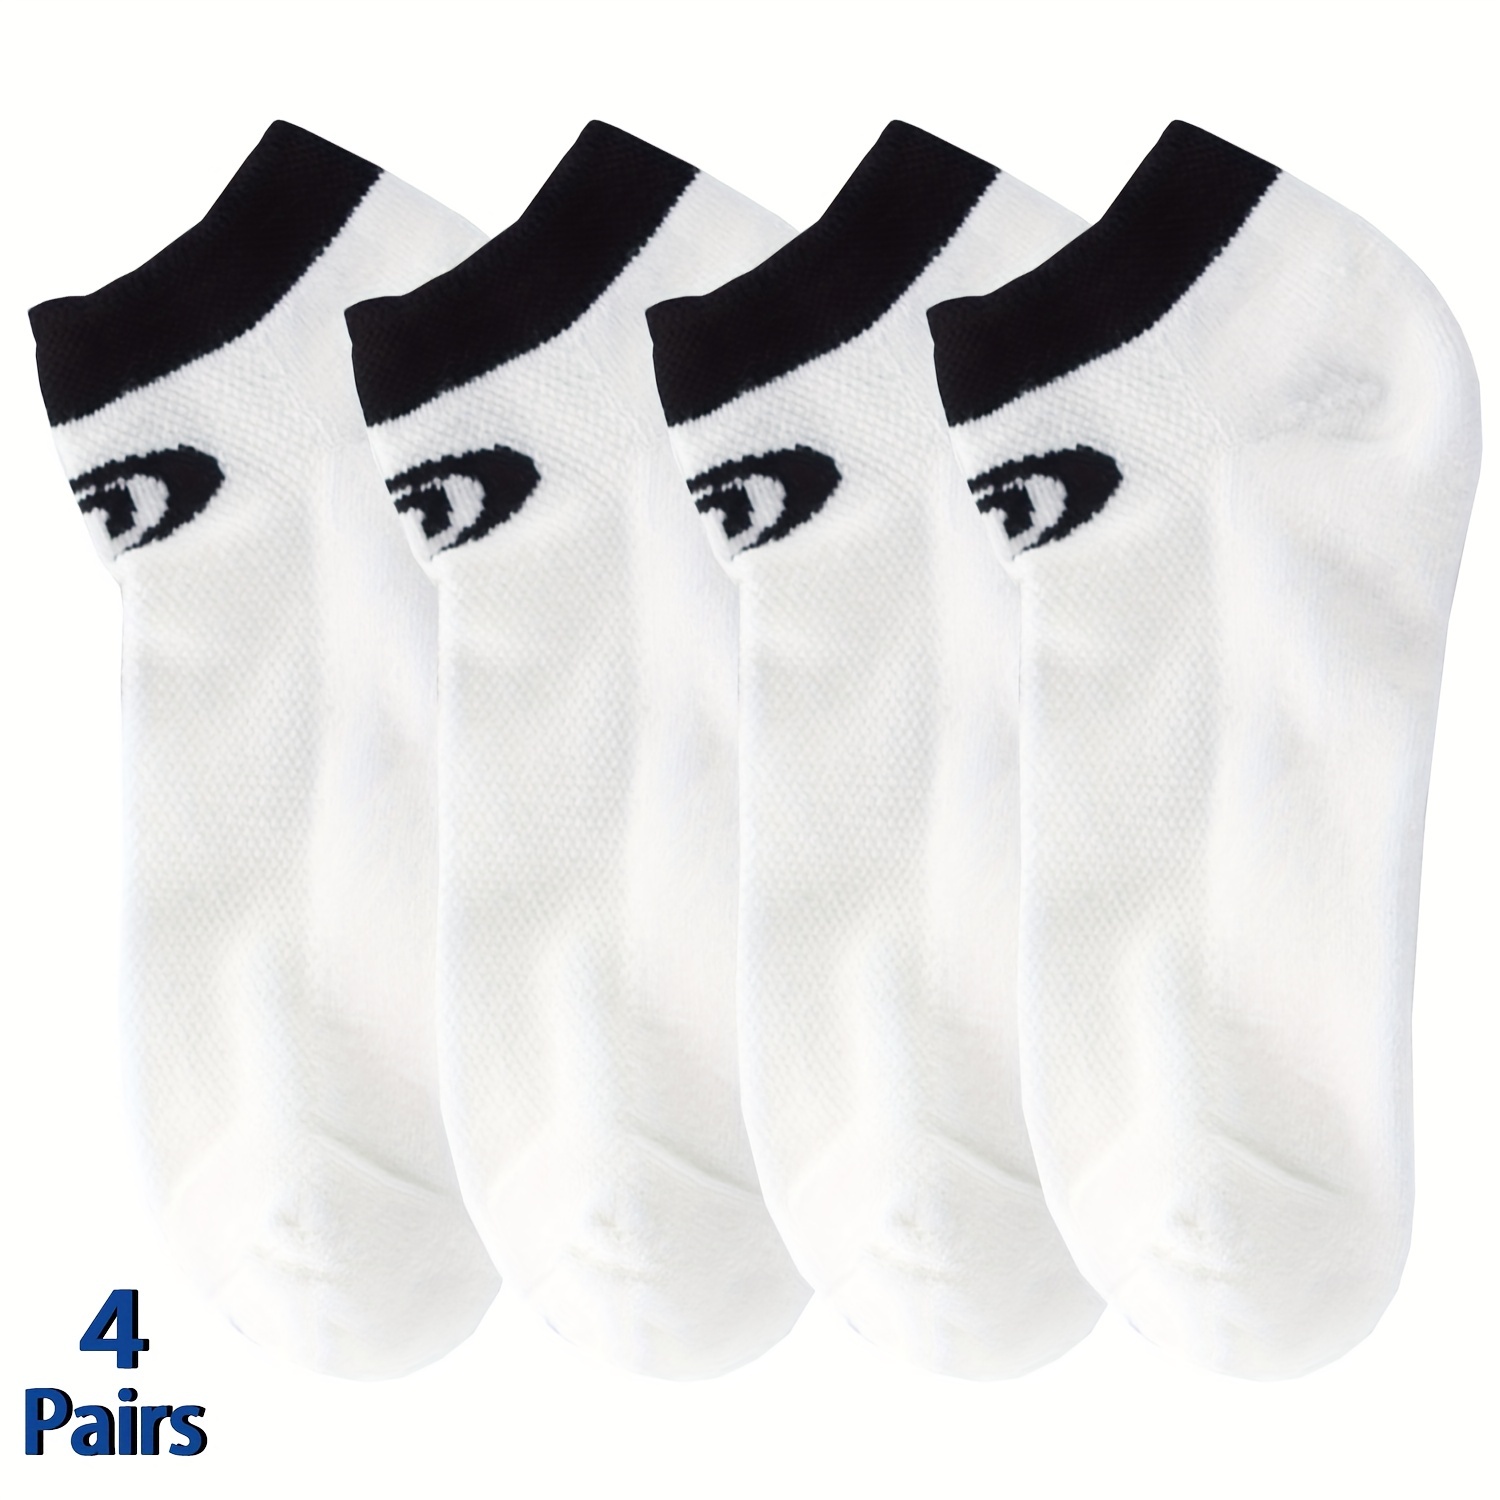 Buy Lin 7 Pack Cycling Socks for Men and Women Funny Color Biking Socks  Performance Athletic Crew Socks at